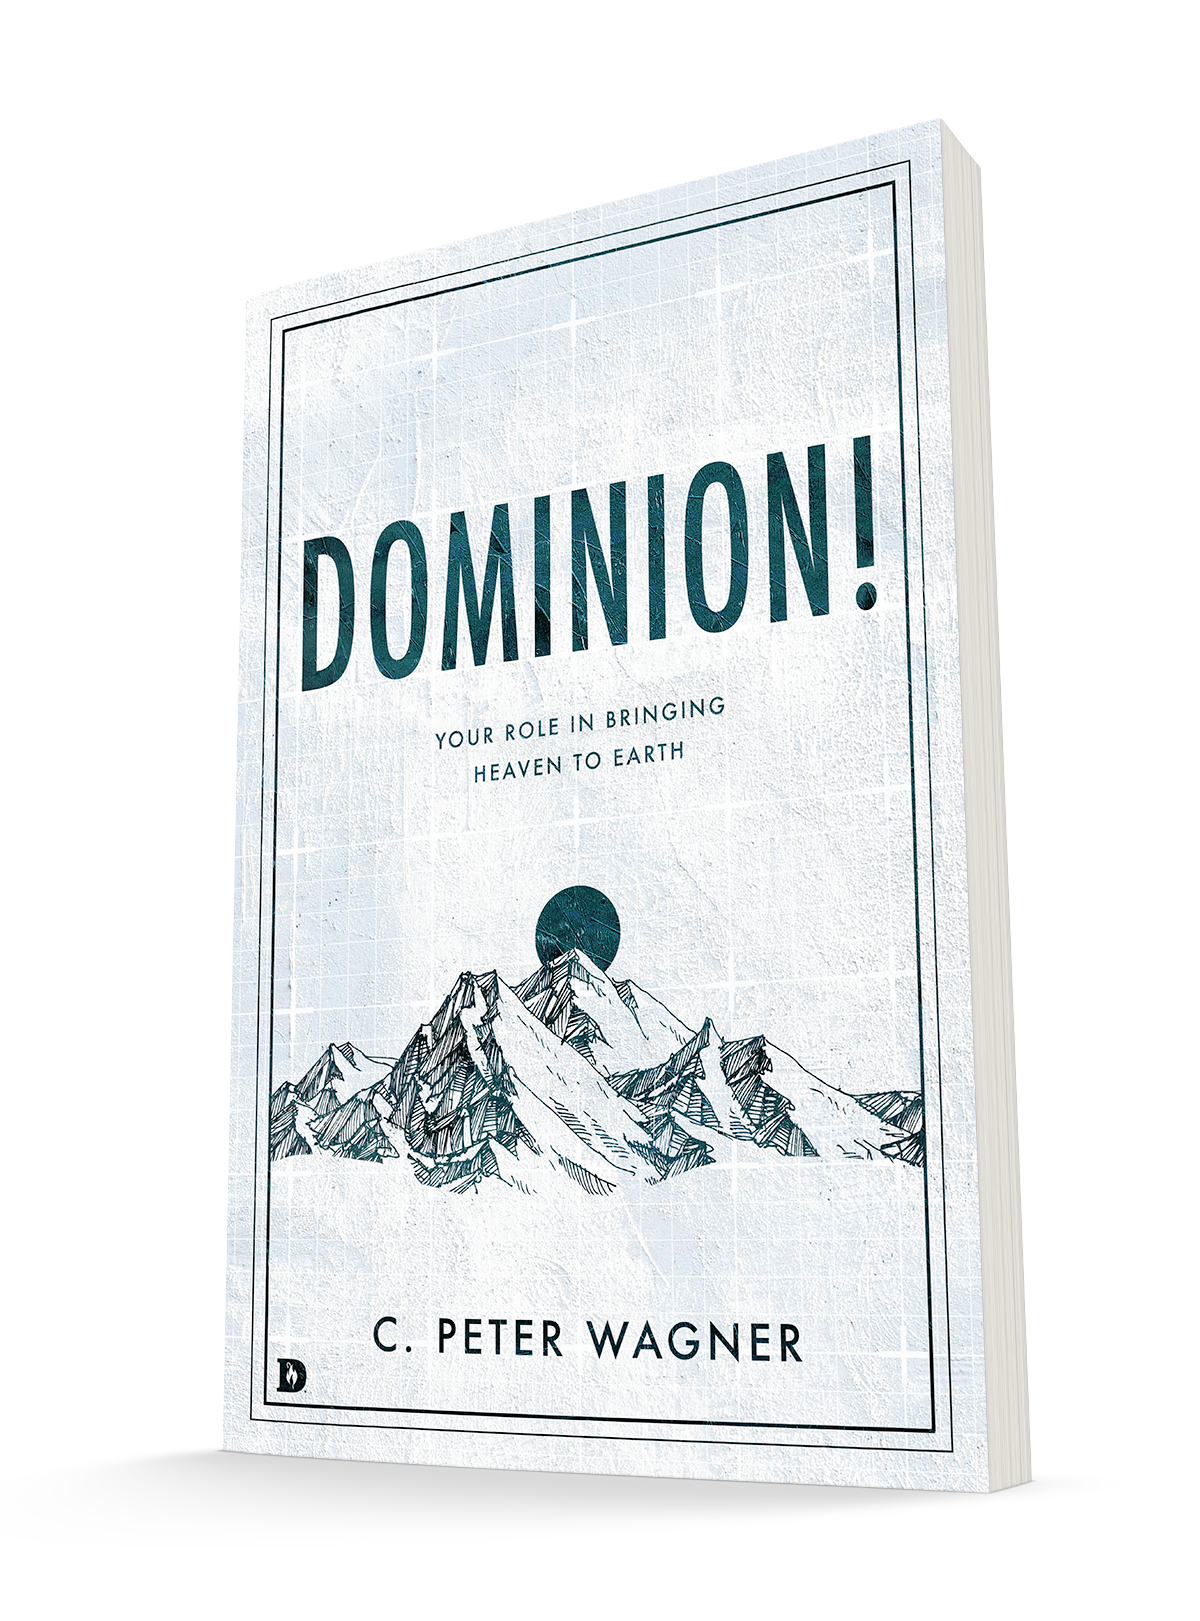 Dominion!: Your Role in Bringing Heaven to Earth Paperback – June 21, 2022